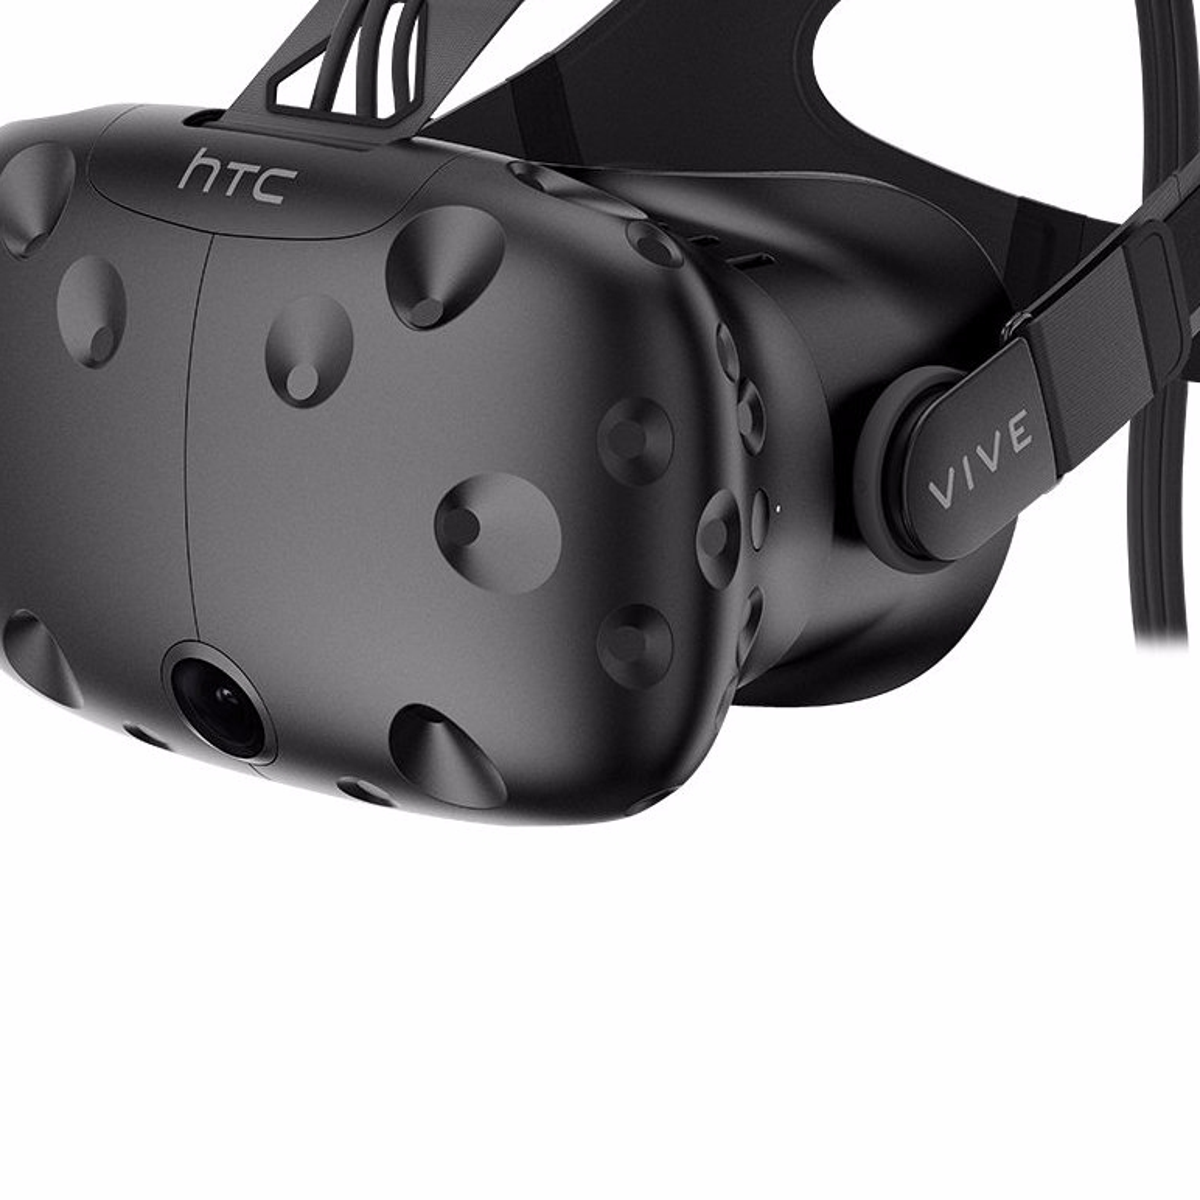 turning-on-your-vive-headset-a-quick-guide